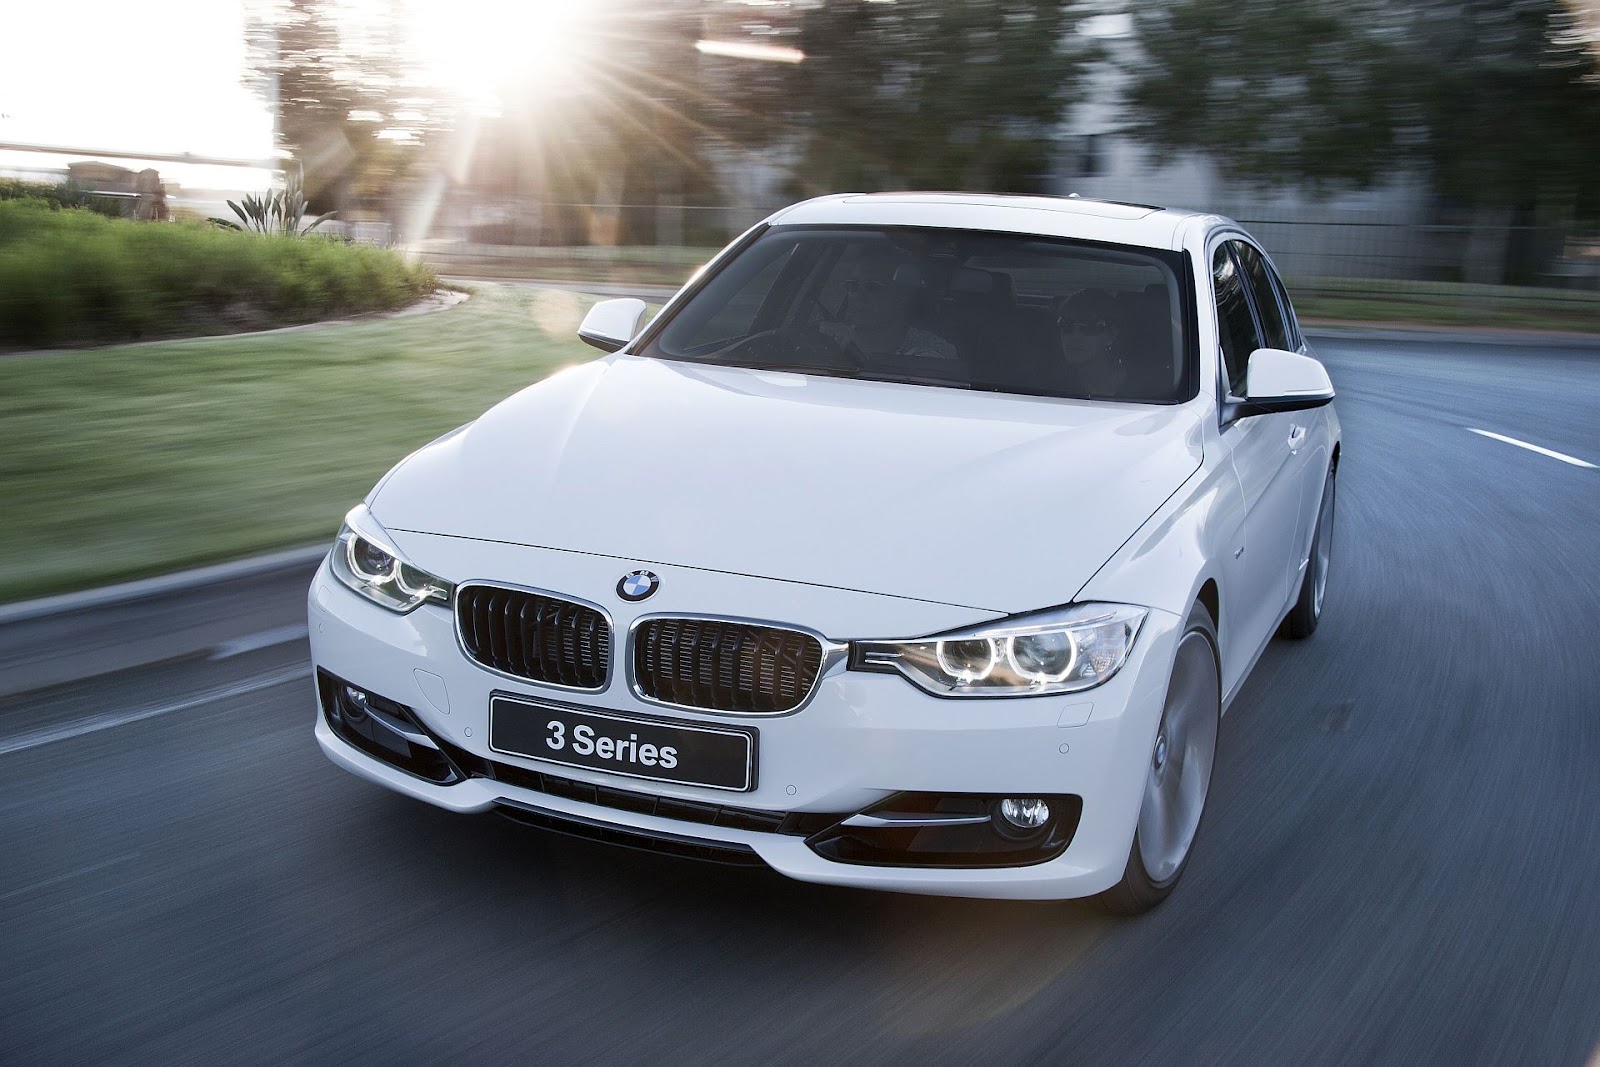 Bmw sales increase in 2012 #1